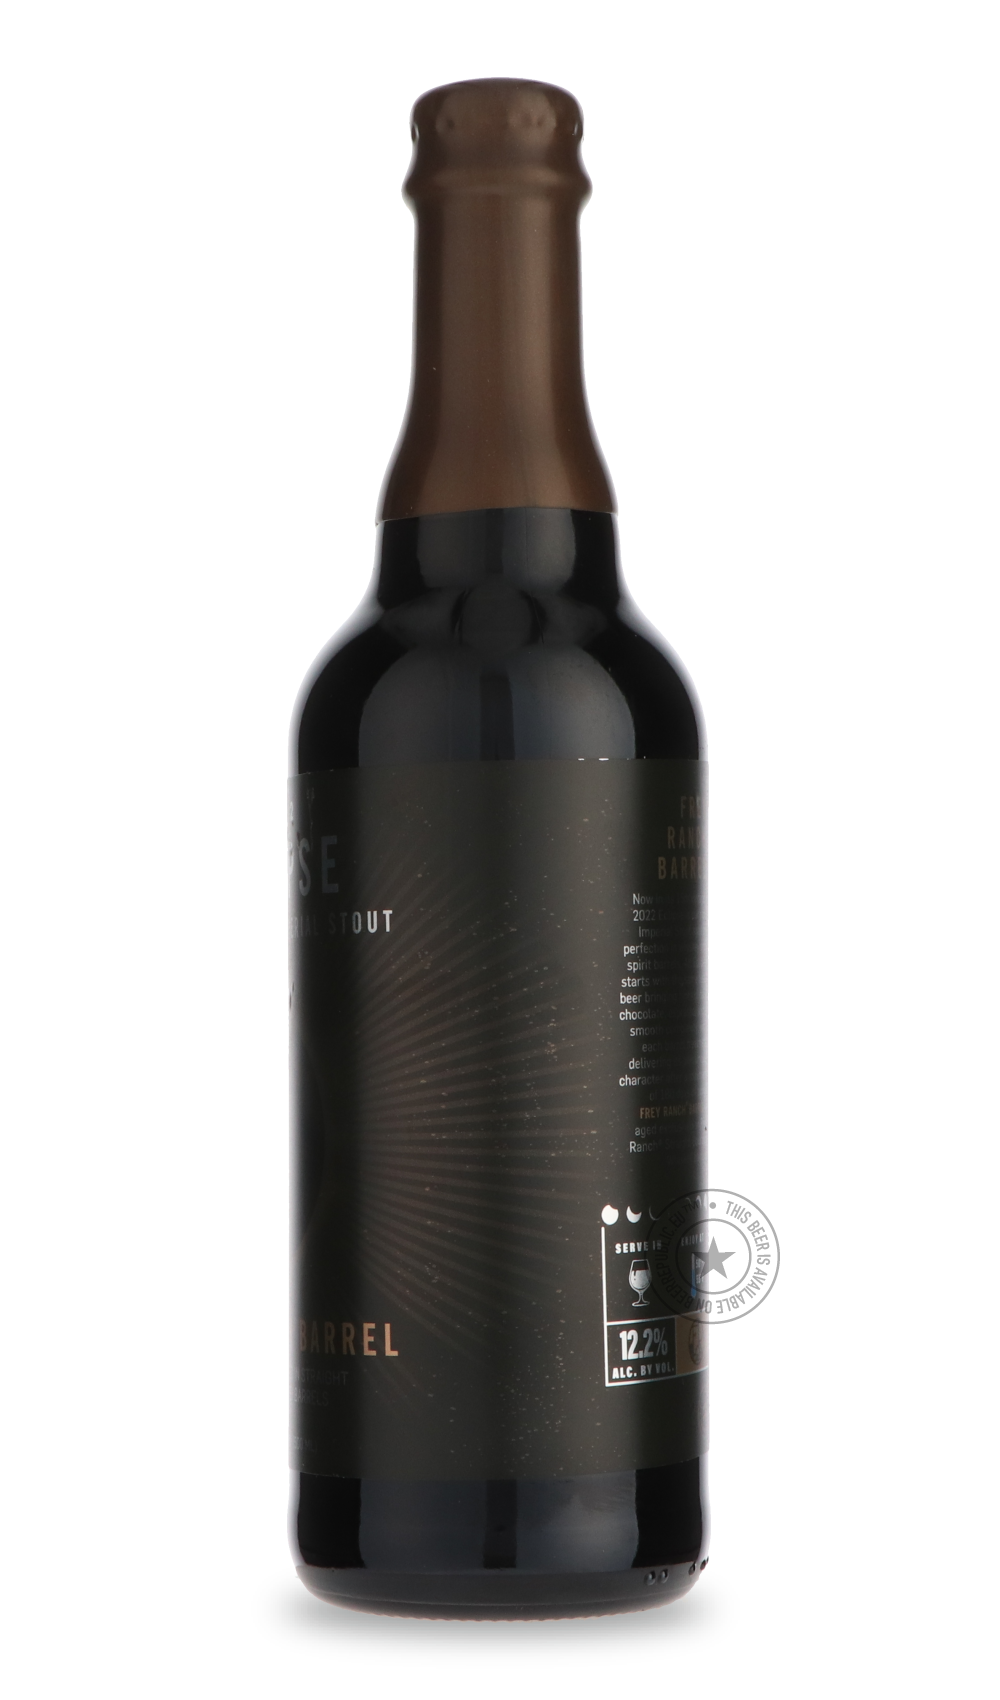 -FiftyFifty- Eclipse - Frey Ranch (2022)-Stout & Porter- Only @ Beer Republic - The best online beer store for American & Canadian craft beer - Buy beer online from the USA and Canada - Bier online kopen - Amerikaans bier kopen - Craft beer store - Craft beer kopen - Amerikanisch bier kaufen - Bier online kaufen - Acheter biere online - IPA - Stout - Porter - New England IPA - Hazy IPA - Imperial Stout - Barrel Aged - Barrel Aged Imperial Stout - Brown - Dark beer - Blond - Blonde - Pilsner - Lager - Wheat 